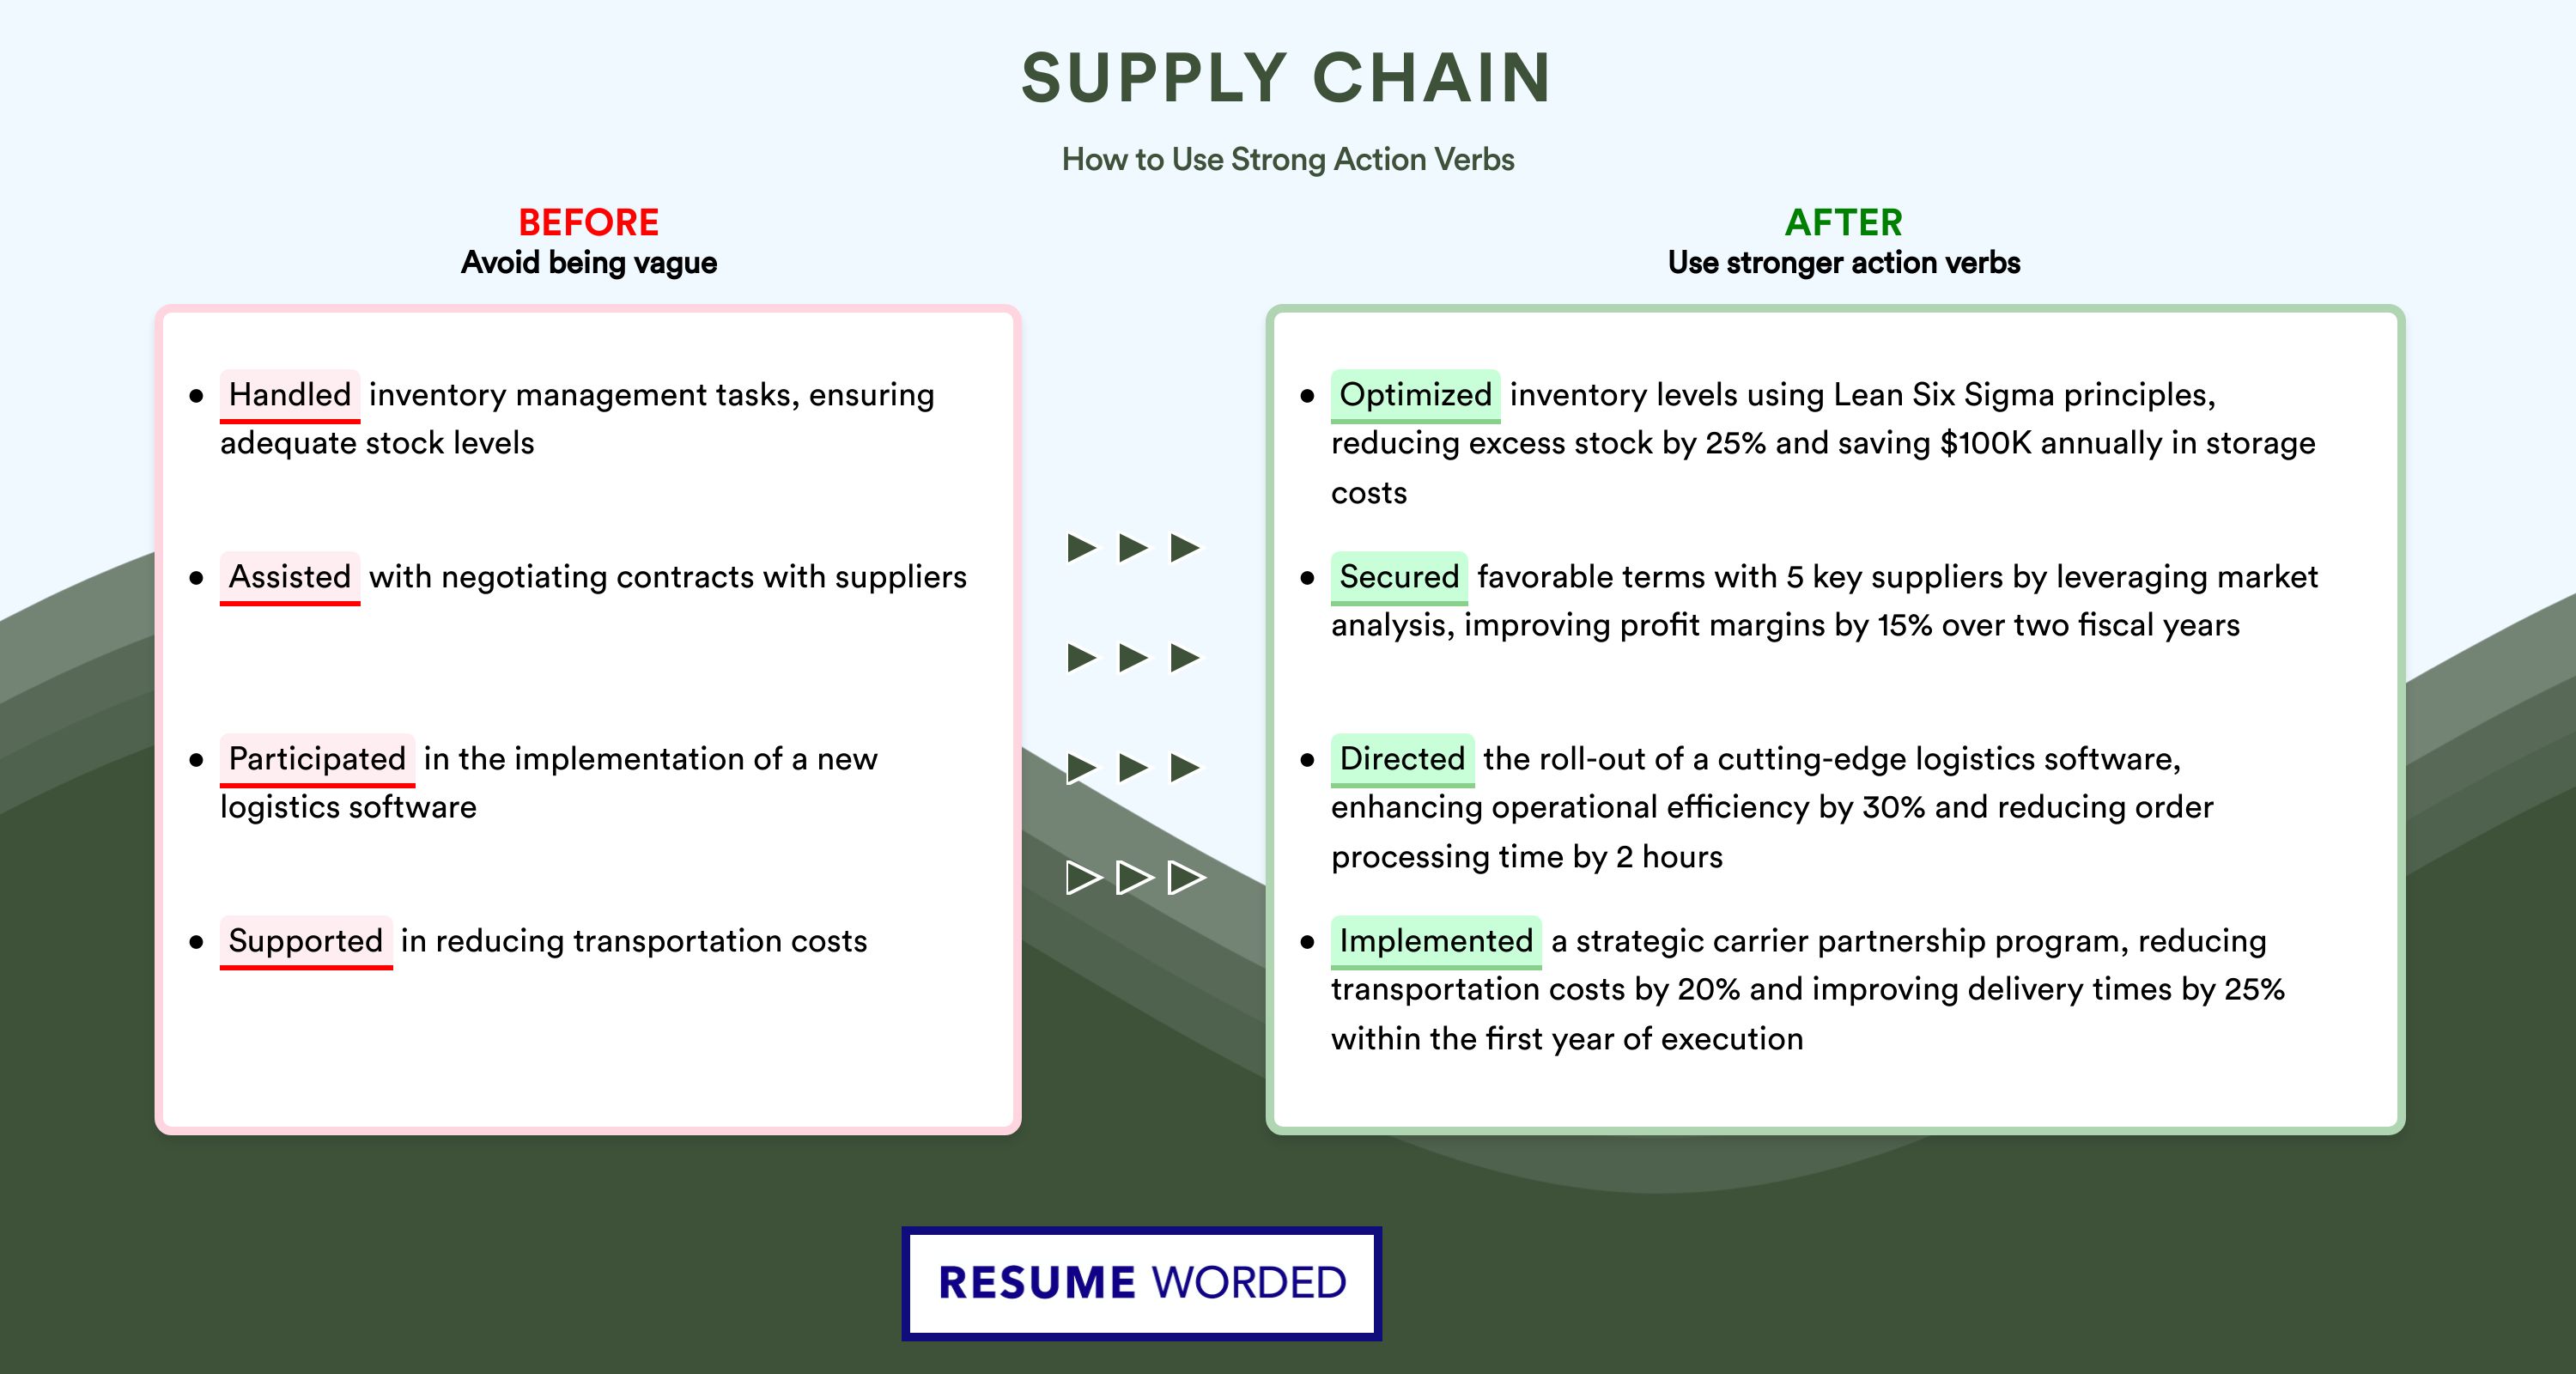 Action Verbs for Supply Chain